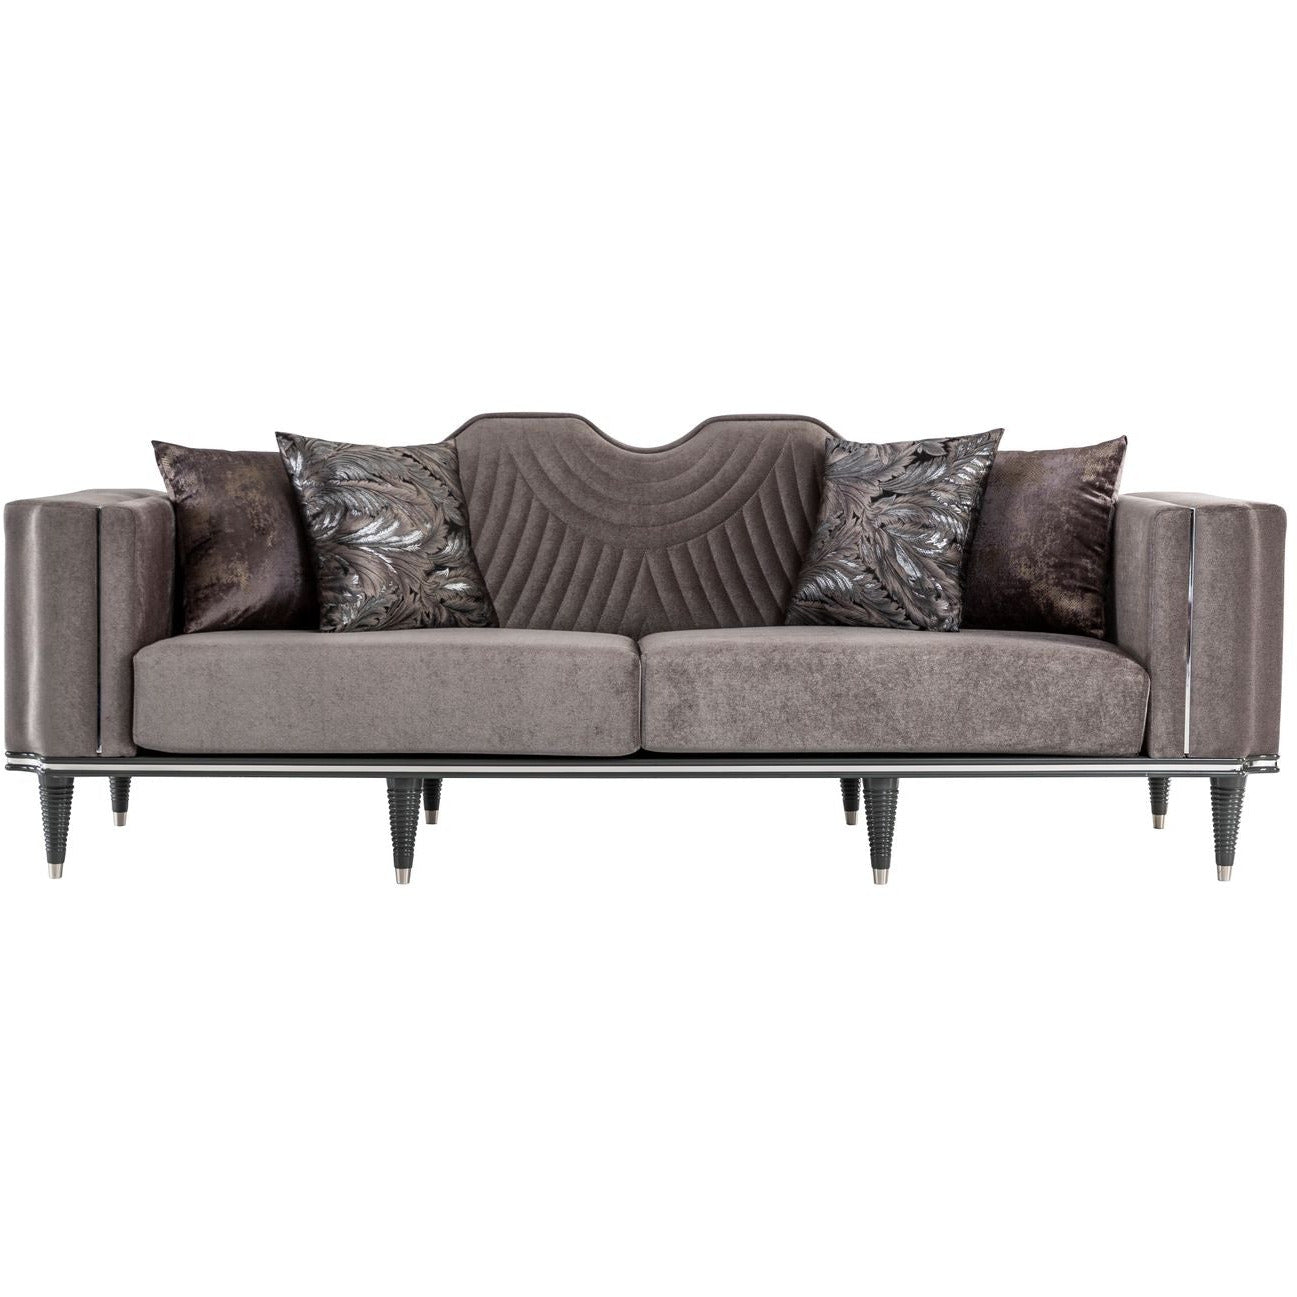 Prd 3-Sits Soffa Lux - LINE Furniture Group